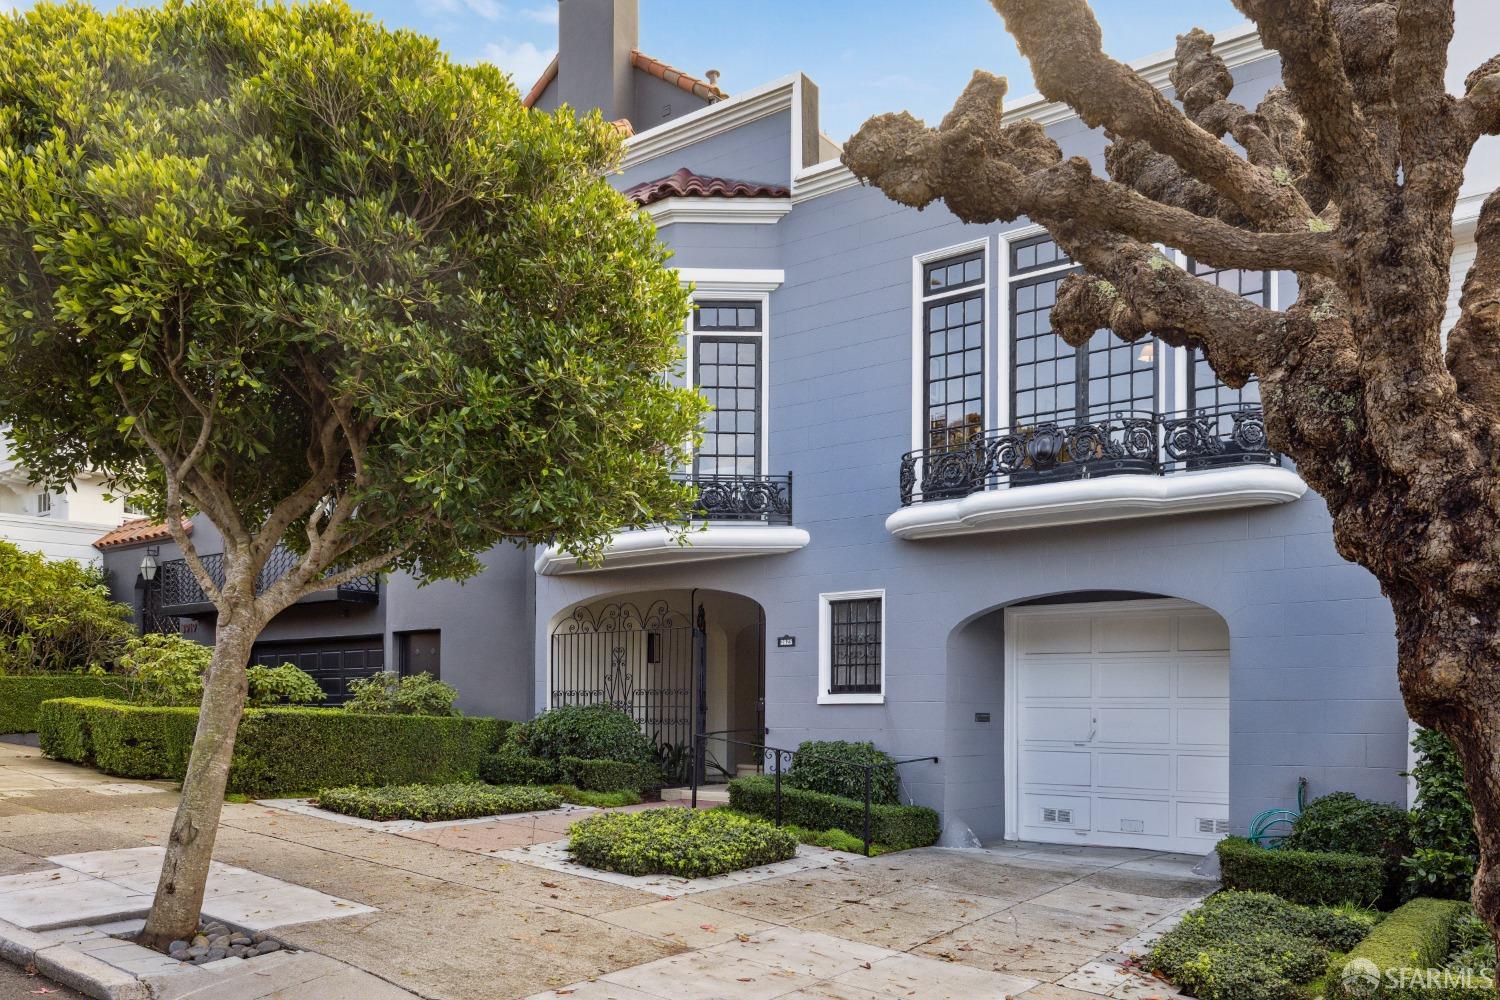 Nestled on a tranquil, tree-lined street in Presidio Heights, this delightful 4BD/3BA light-filled home is a rare find w/the perfect balance of formality & informality. Flooded w/ natural light from a huge skylight, the foyer opens to the LR & DR w/rich parquet floors & tall, French doors w/Romeo balconies. The chef's kitchen features Statuario marble counters & opens to a cozy breakfast/sitting room.  Bedrooms, including a luxurious primary suite with abundant closets, are accessed from a sky-lit central hall.  The primary opens to both a sun-drenched deck w/ garden views & a cheery sunroom which may be a nursery or sitting rm. The en suite primary BA features double sinks & a glass-enclosed stall shower.  Downstairs, the spectacular fam rm, with transom-topped, sliding glass doors, opens to the beautifully landscaped garden patio. A BD & BA add versatility to the lower level. Completing this home is a 2-car gar w/interior access & space for an addit'l car off-street in the driveway. Expansion potential - buyer to investigate.  Large lot (approx.) 32' x 127,'  This is a very special home in a fabulous location!